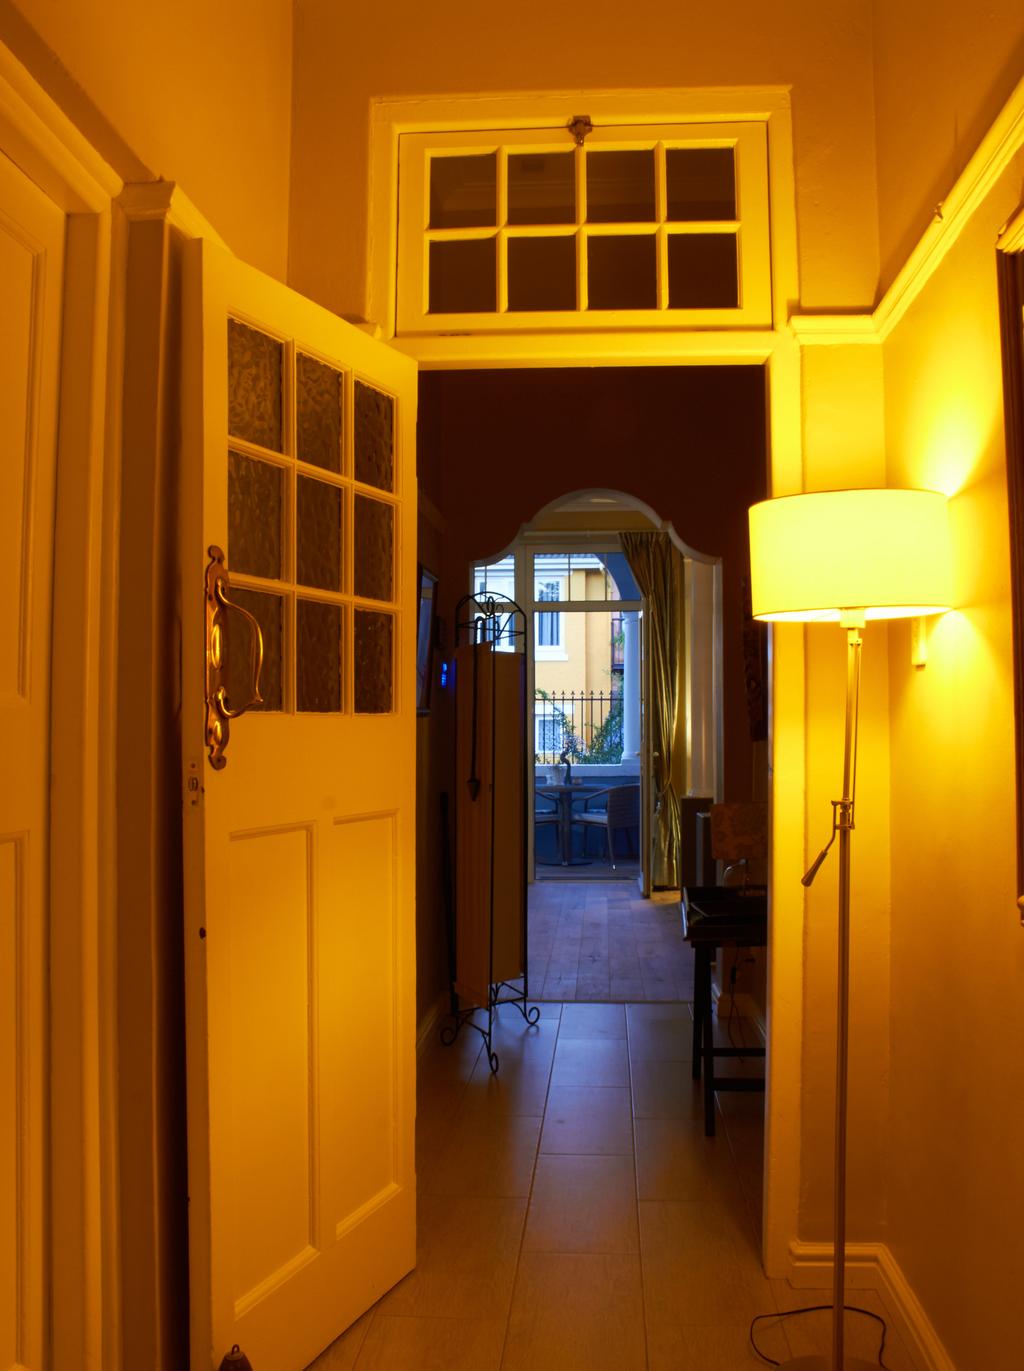 Being an old Victorian house, the passage way had several doors leading to the different rooms, including the kitchen.